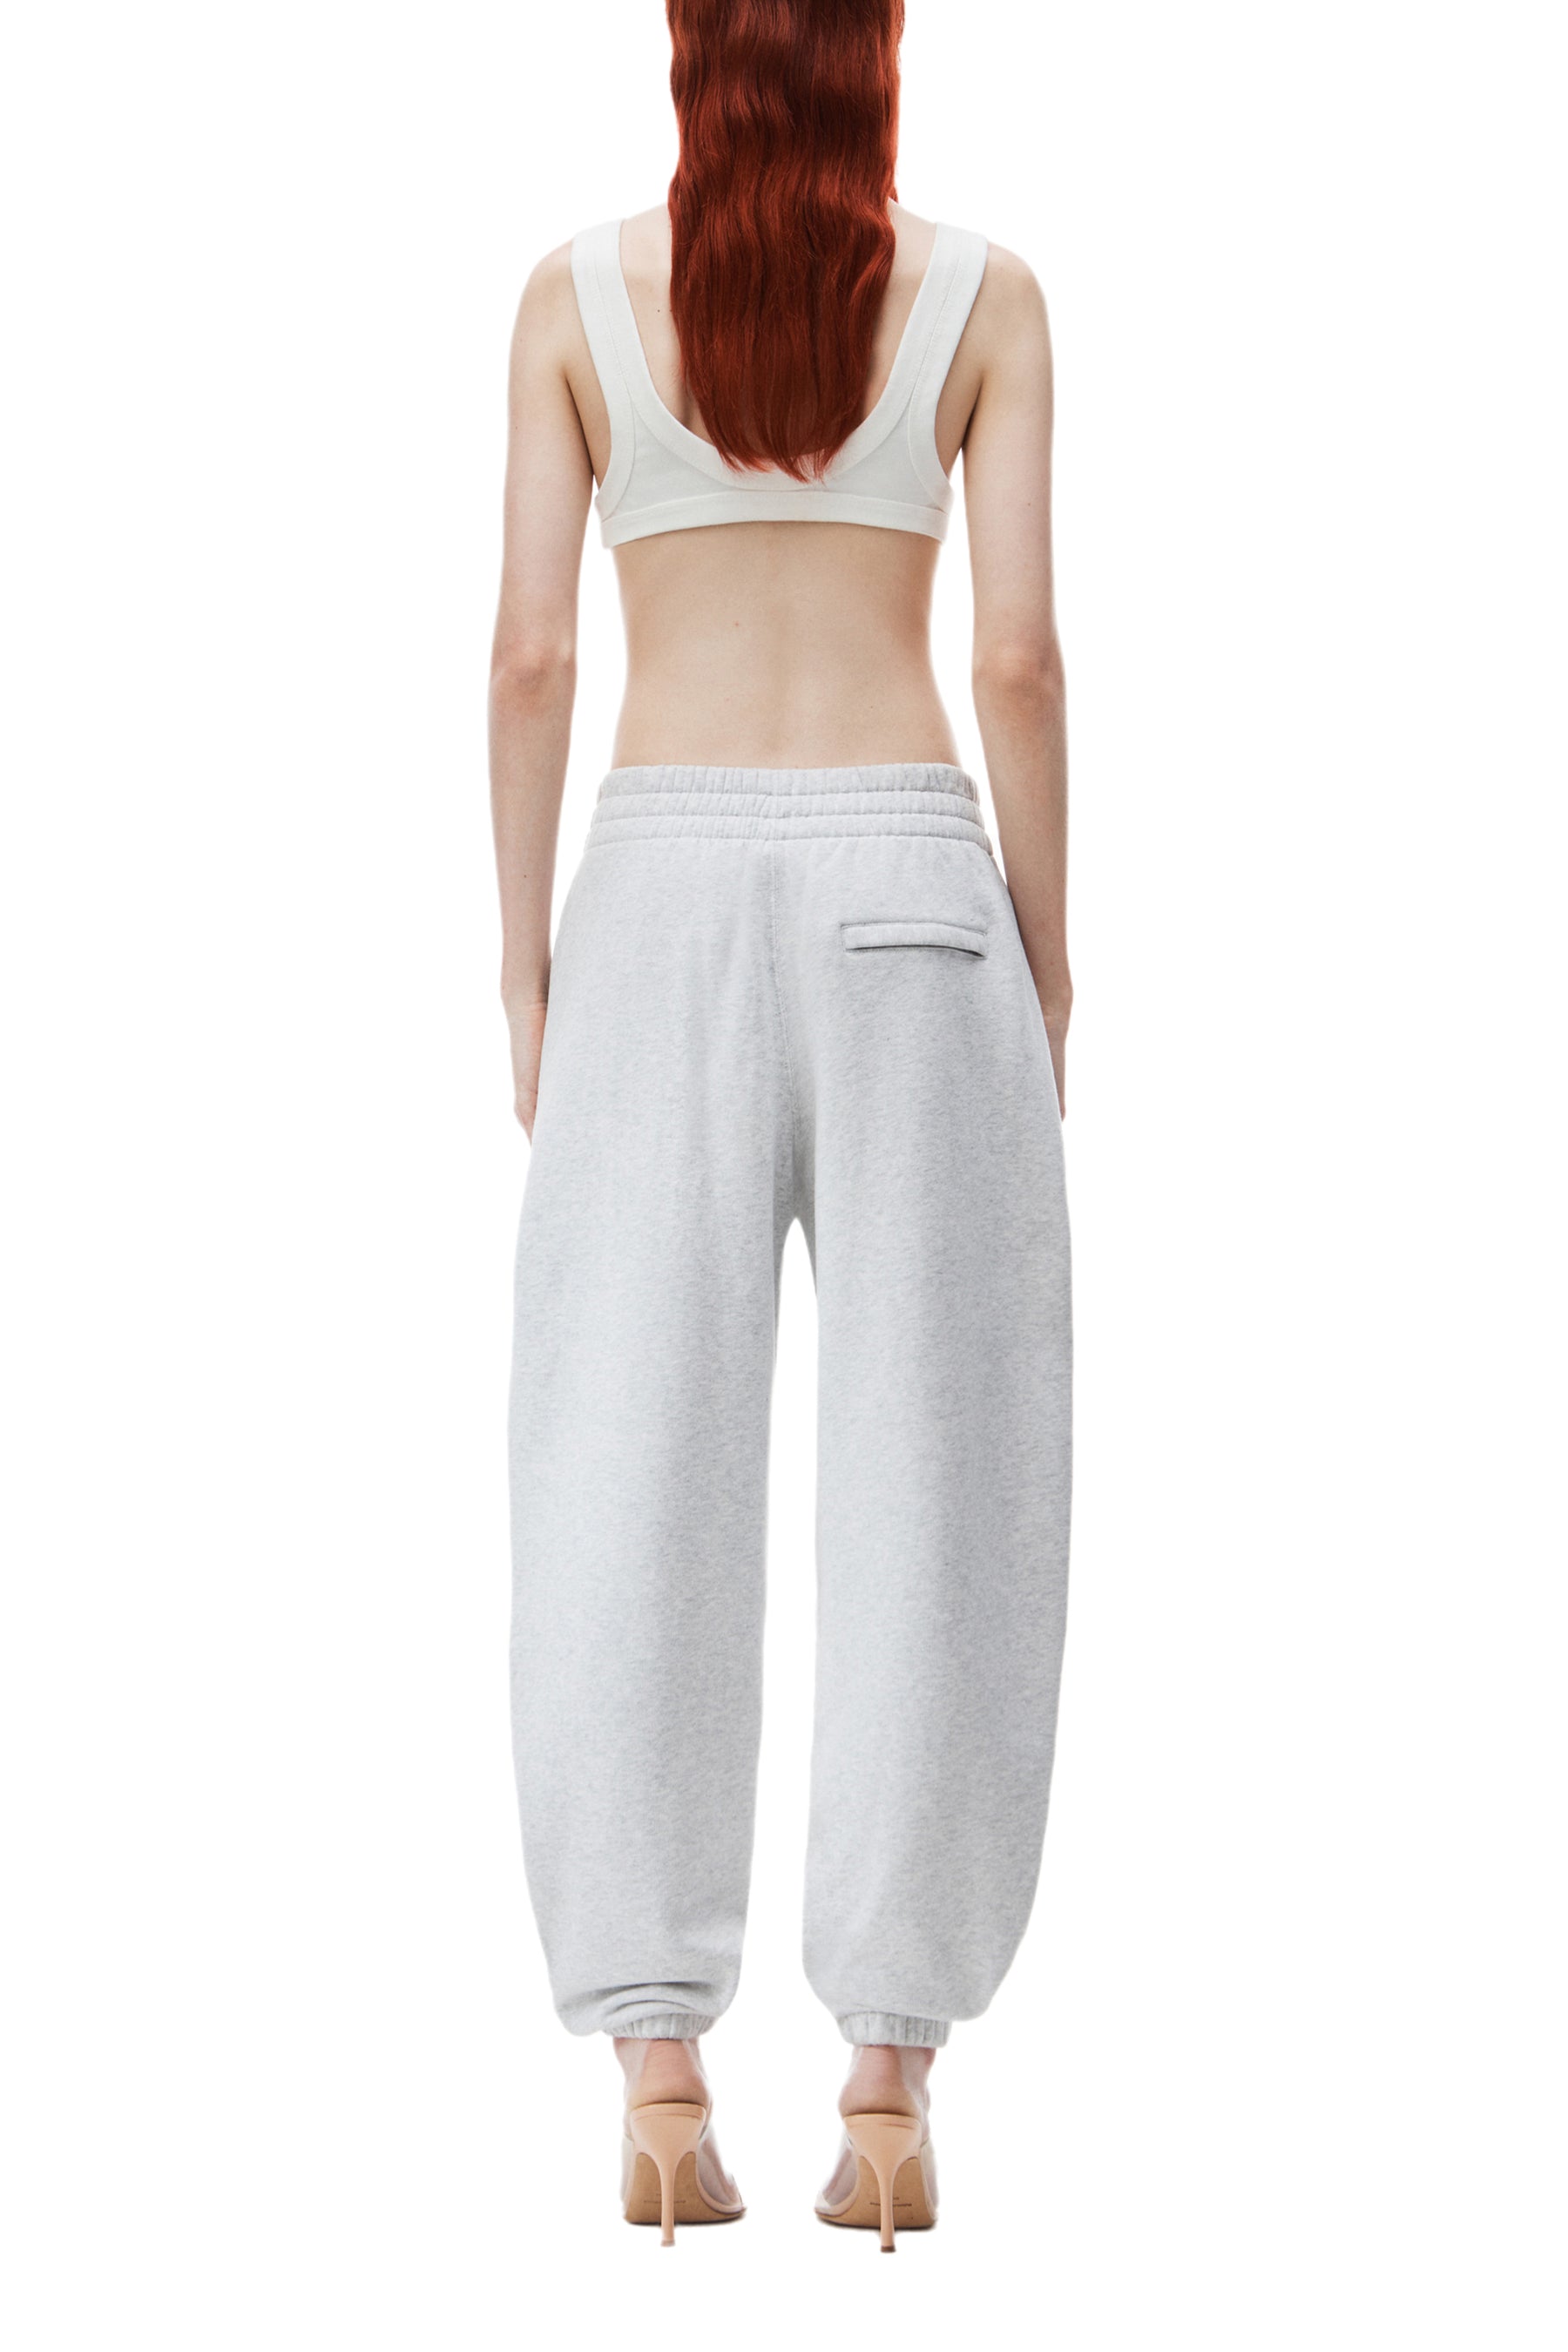 ESSENTIAL TERRY CLASSIC SWEATPANT PUFF PAINT LOGO / LIGHT HEATHER GREY